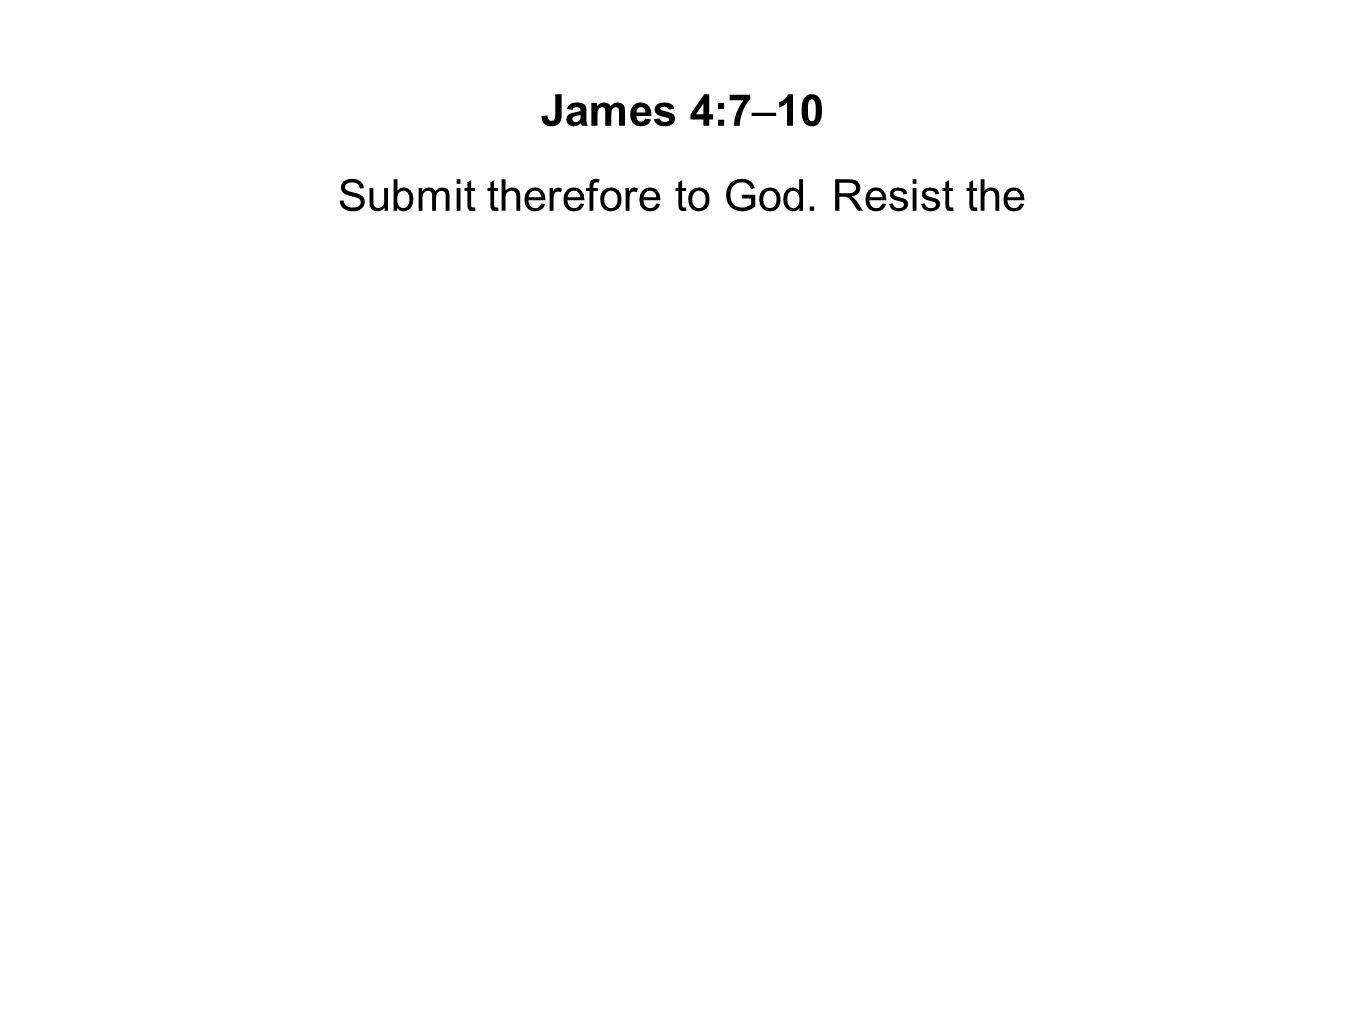 Submit therefore to God. Resist the